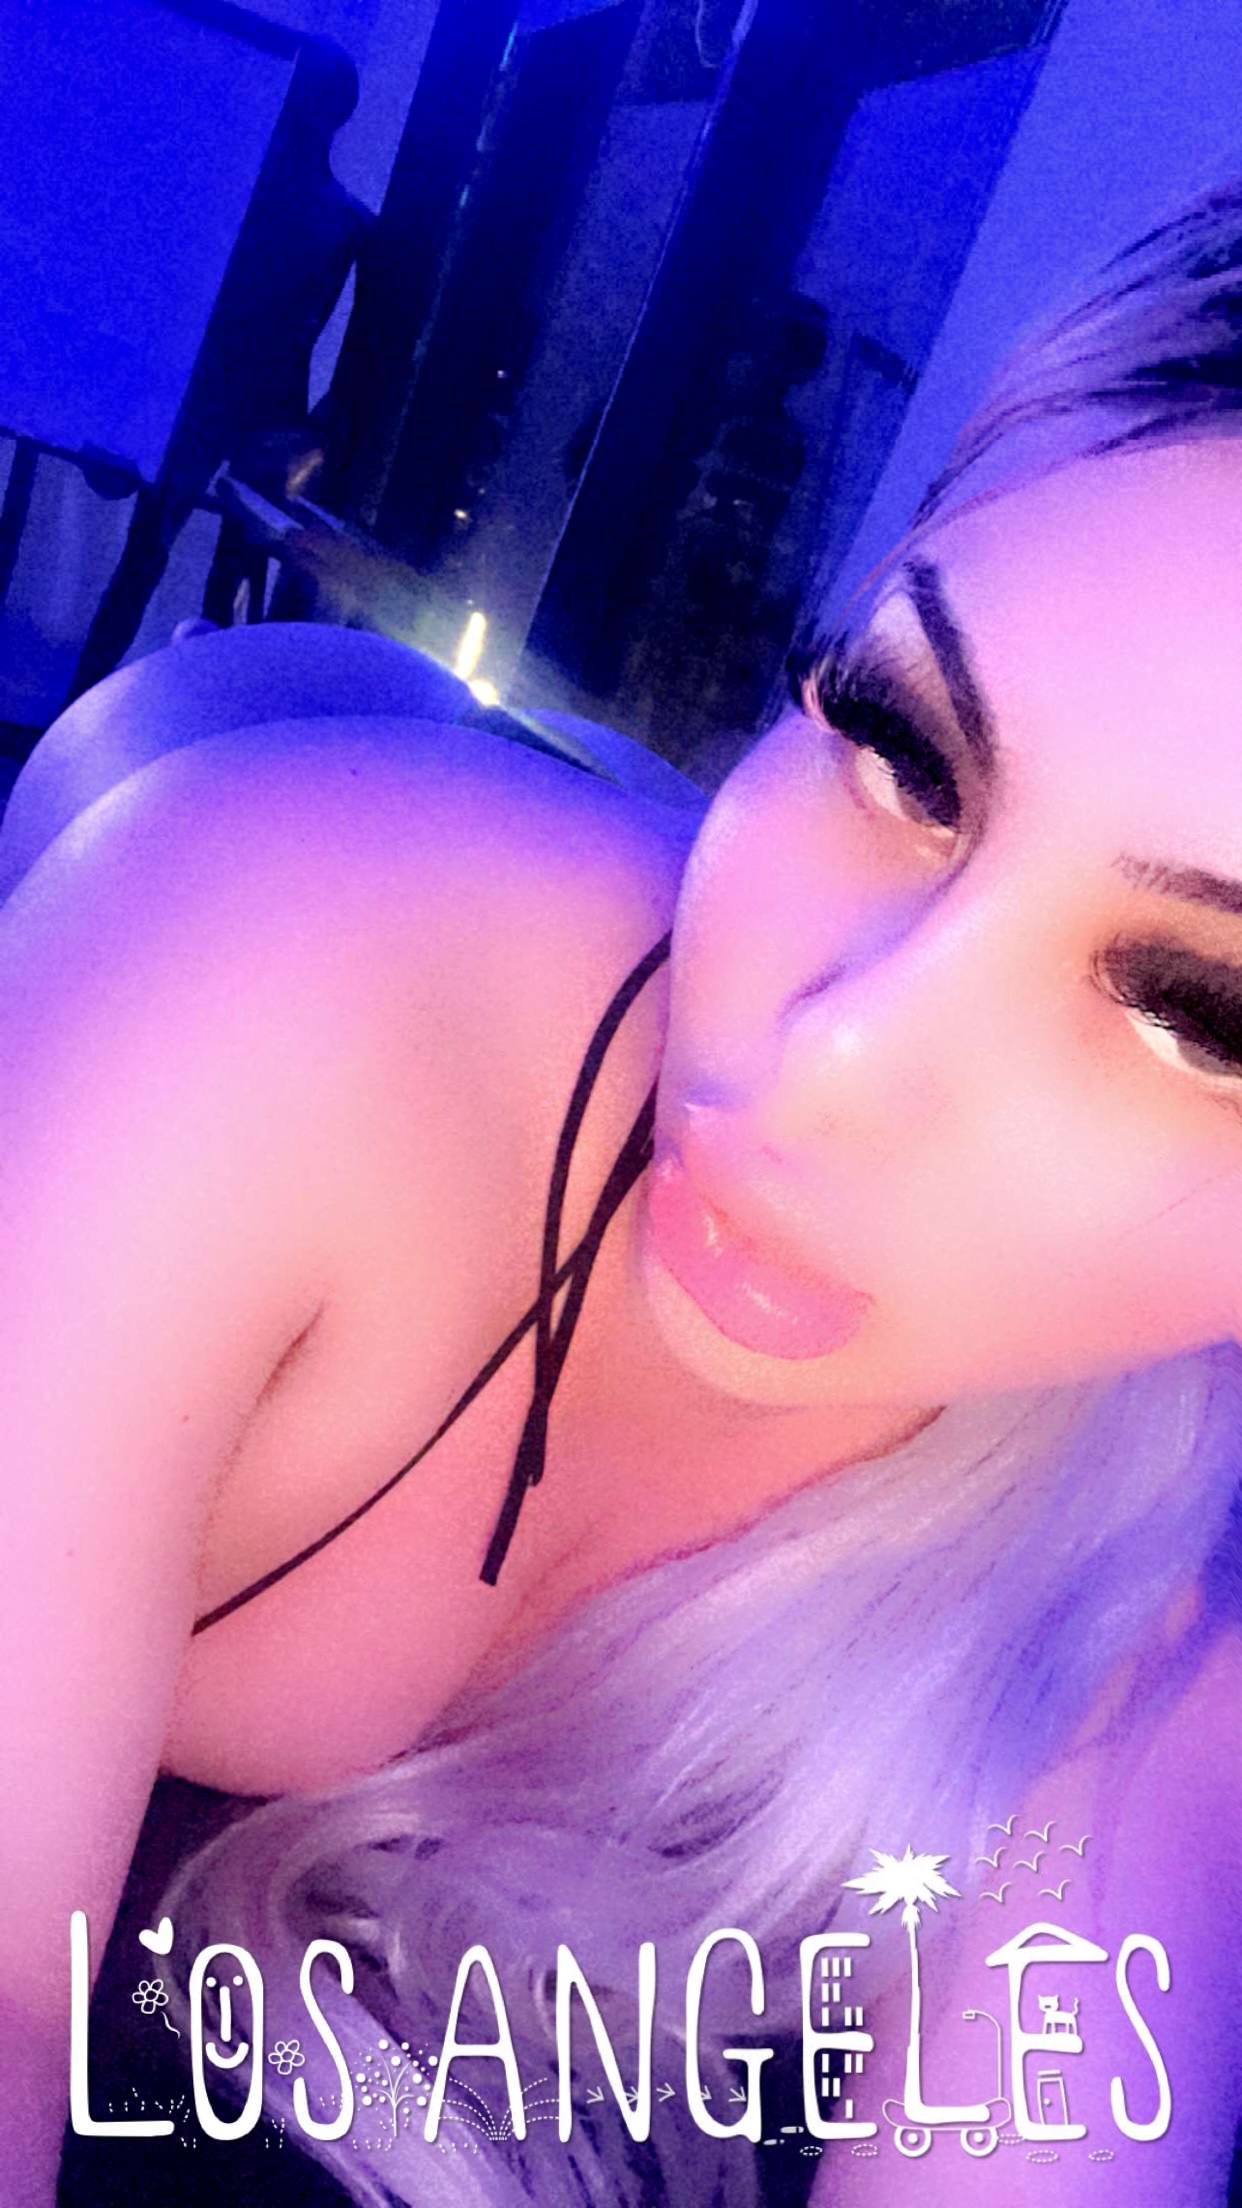 OfficialAridoll ✨ Visting dont miss out 🌸✨ Massage